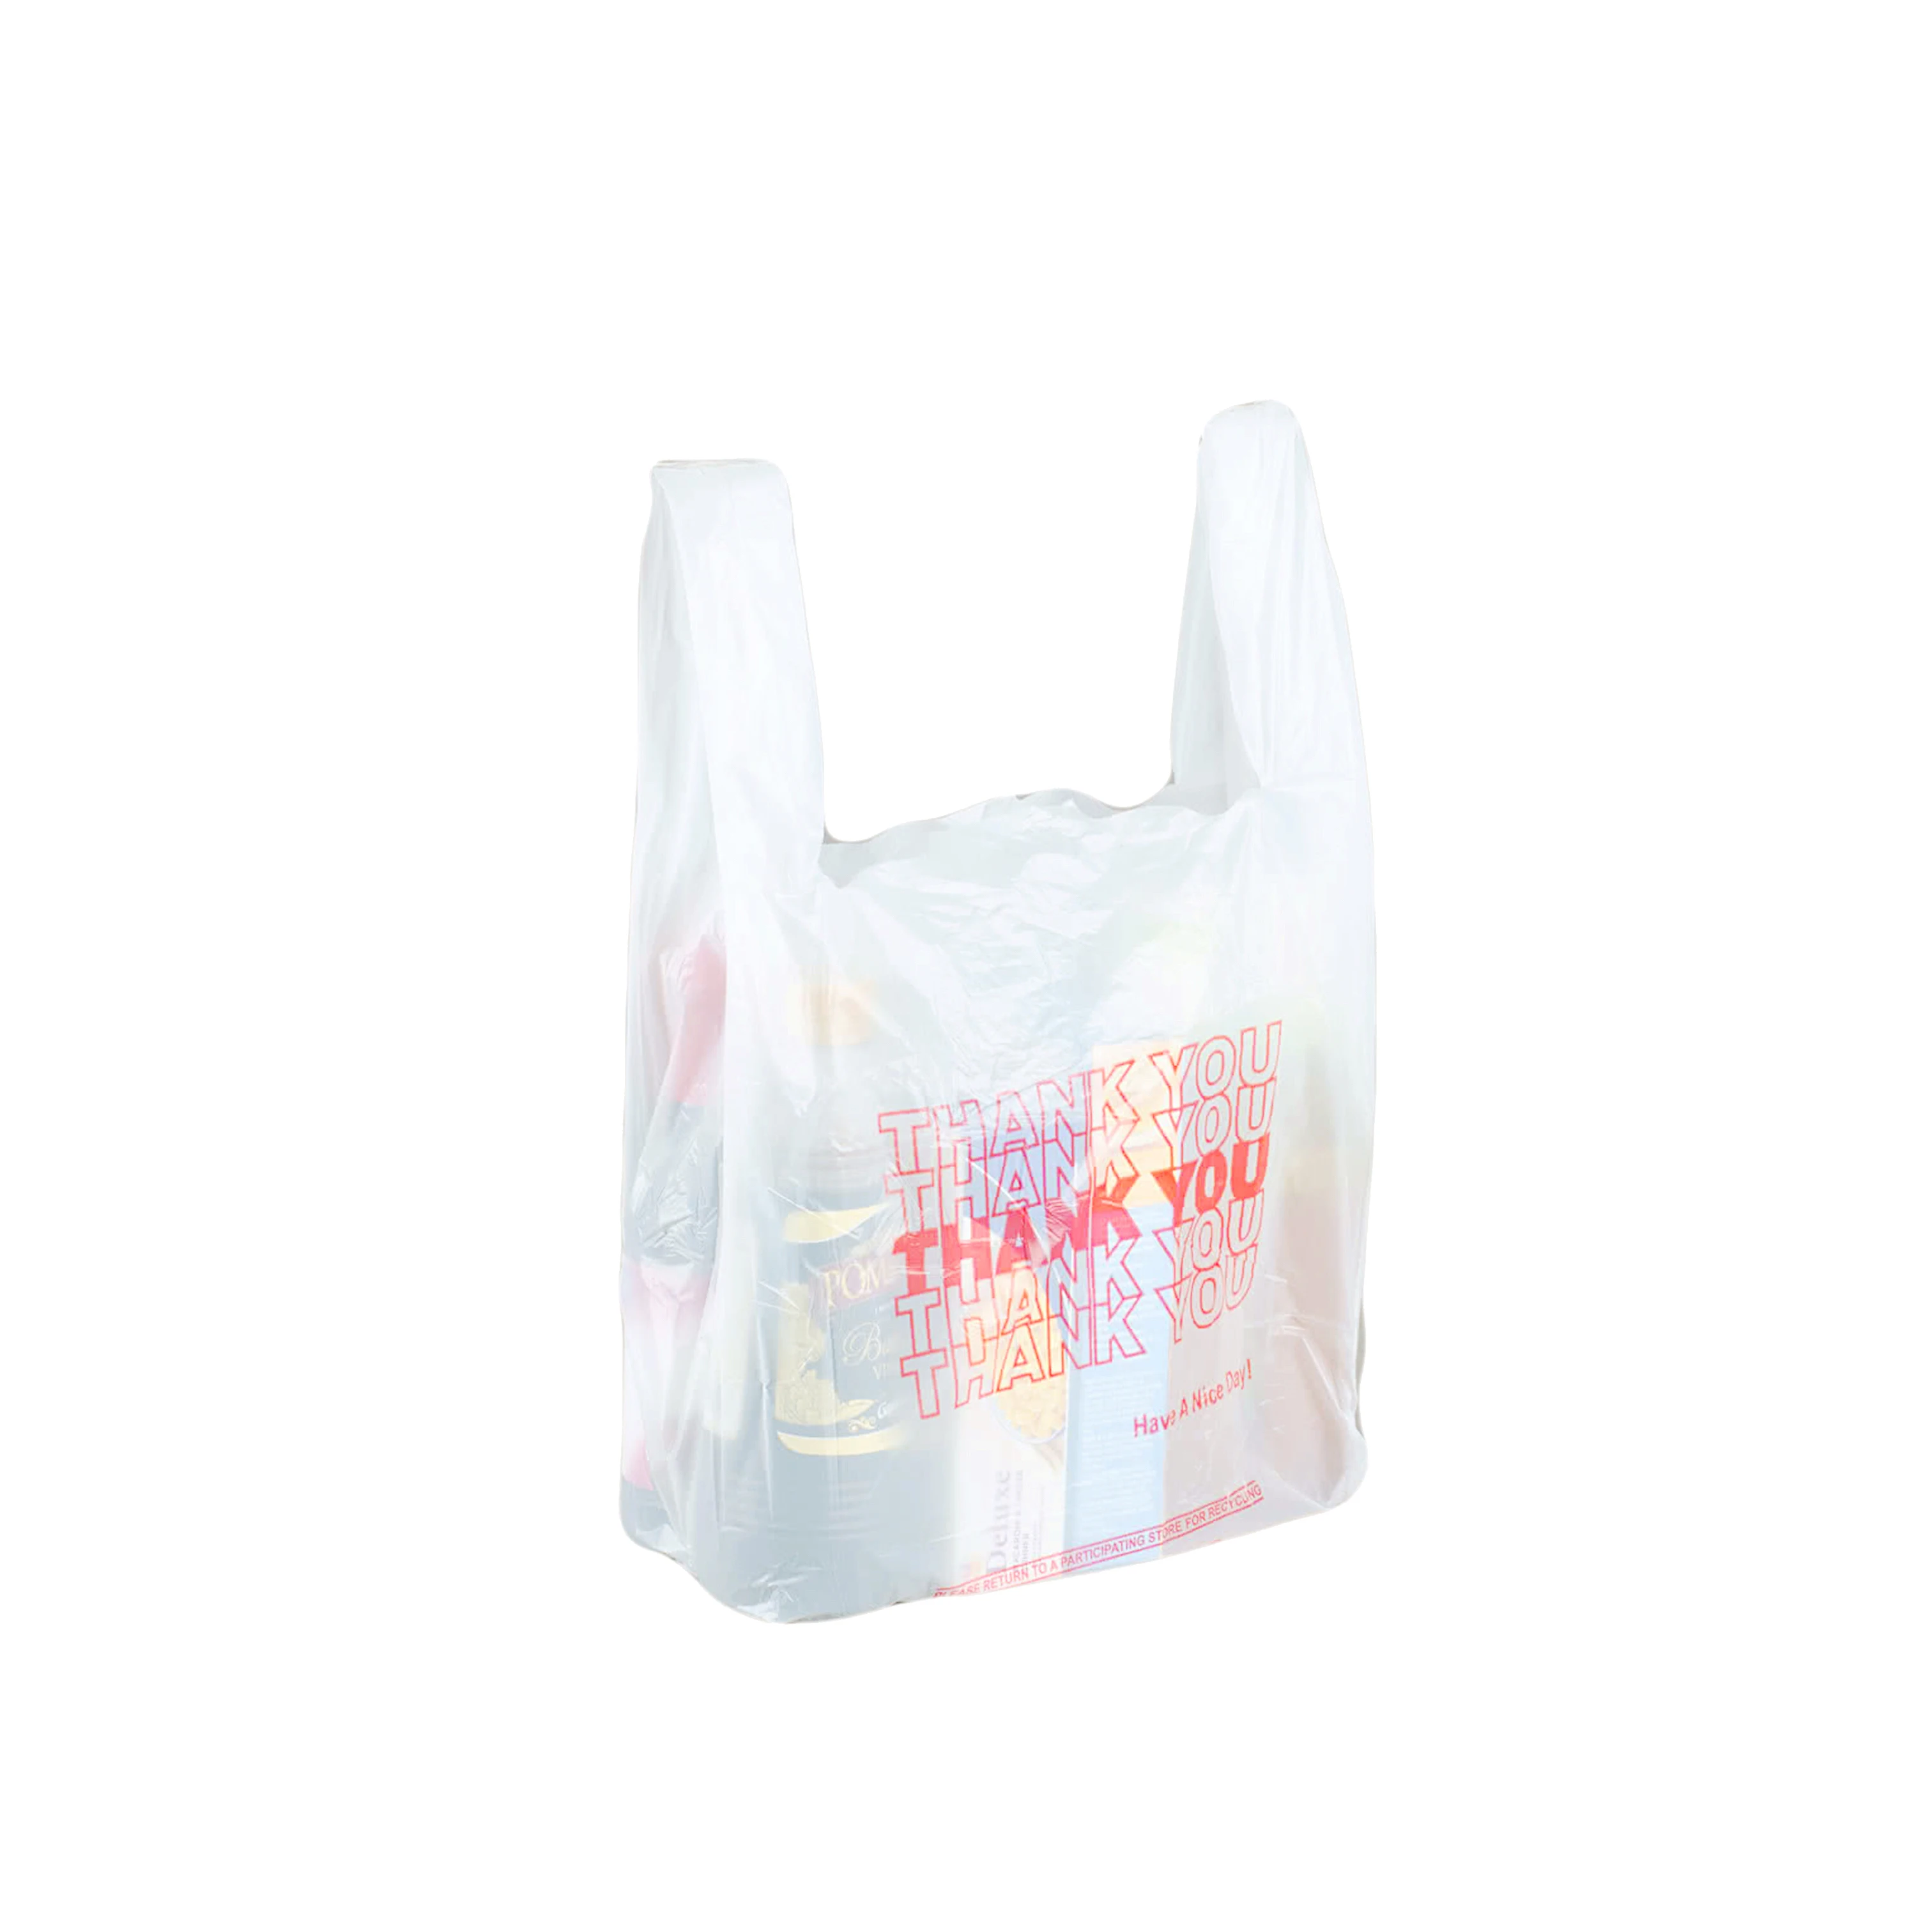 Alibaba Packaging Shopping Bag With Private Label - Buy Shopping Bag,Alibaba China,Private Label ...